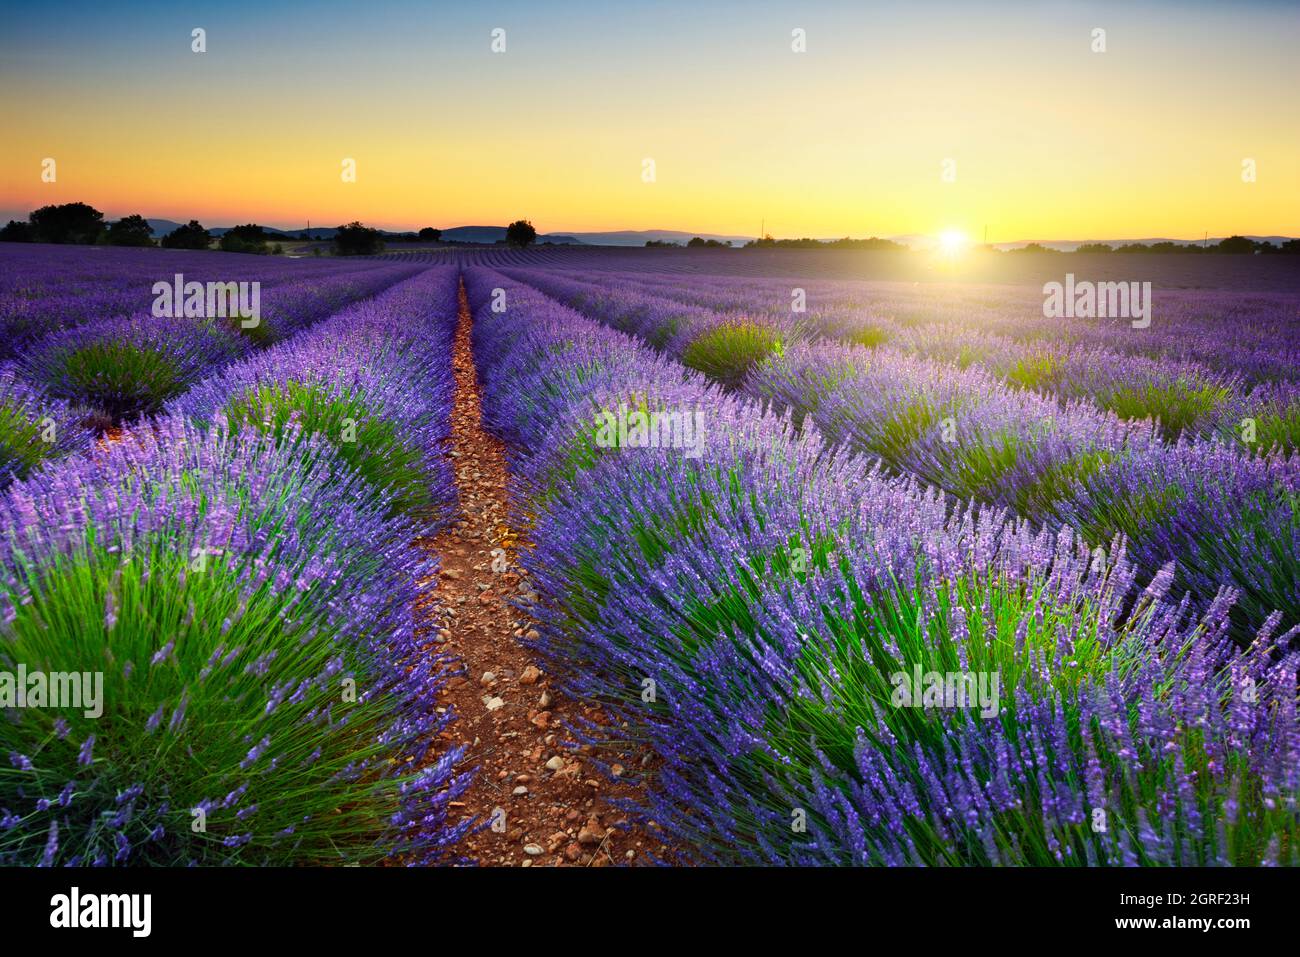 Lavender field at sunset, Provence, France Stock Photo